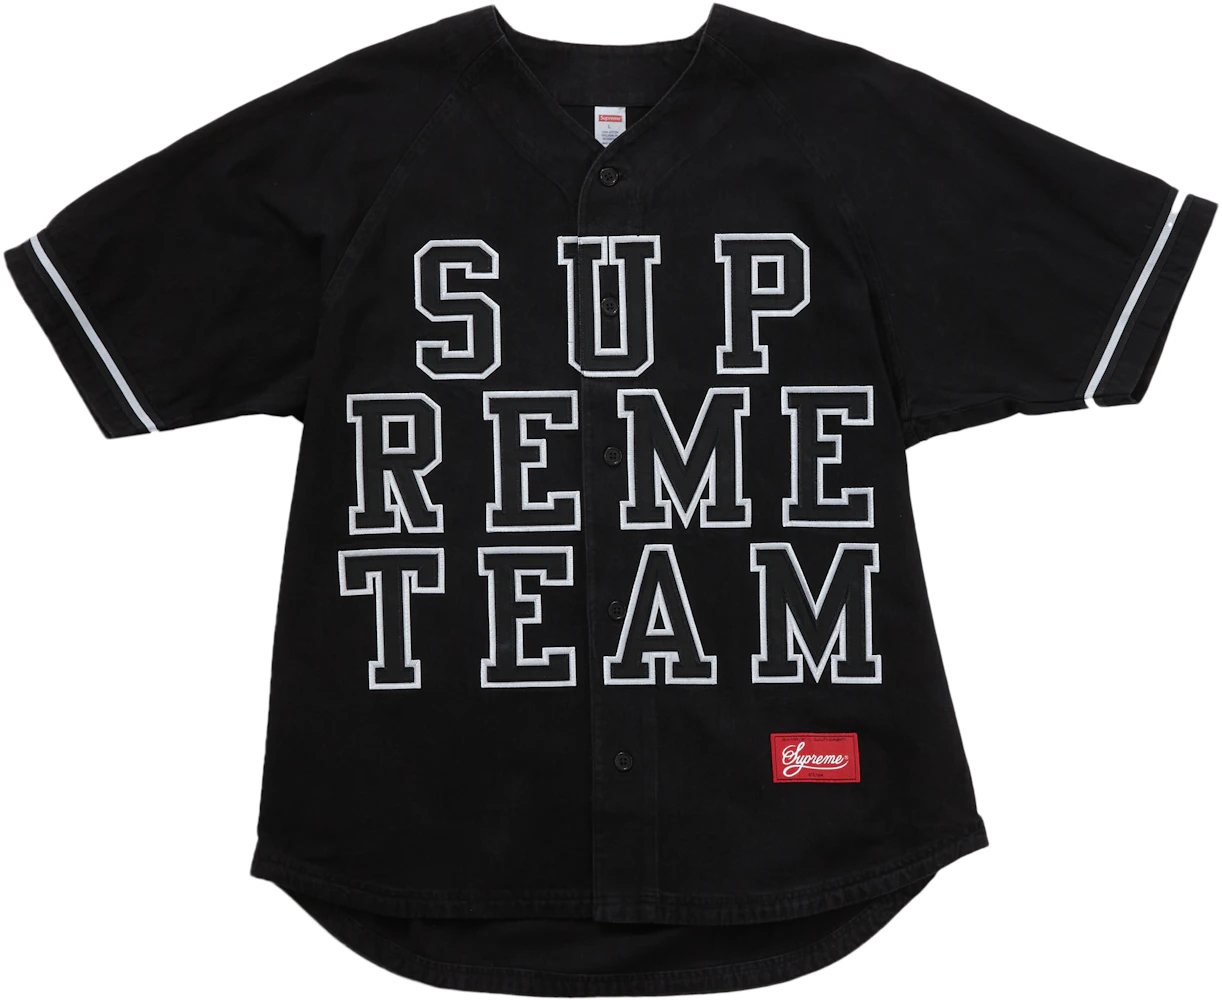 Supreme (probably fake) Satin Baseball Black Jersey Men's Large - clothing  & accessories - by owner - apparel sale 